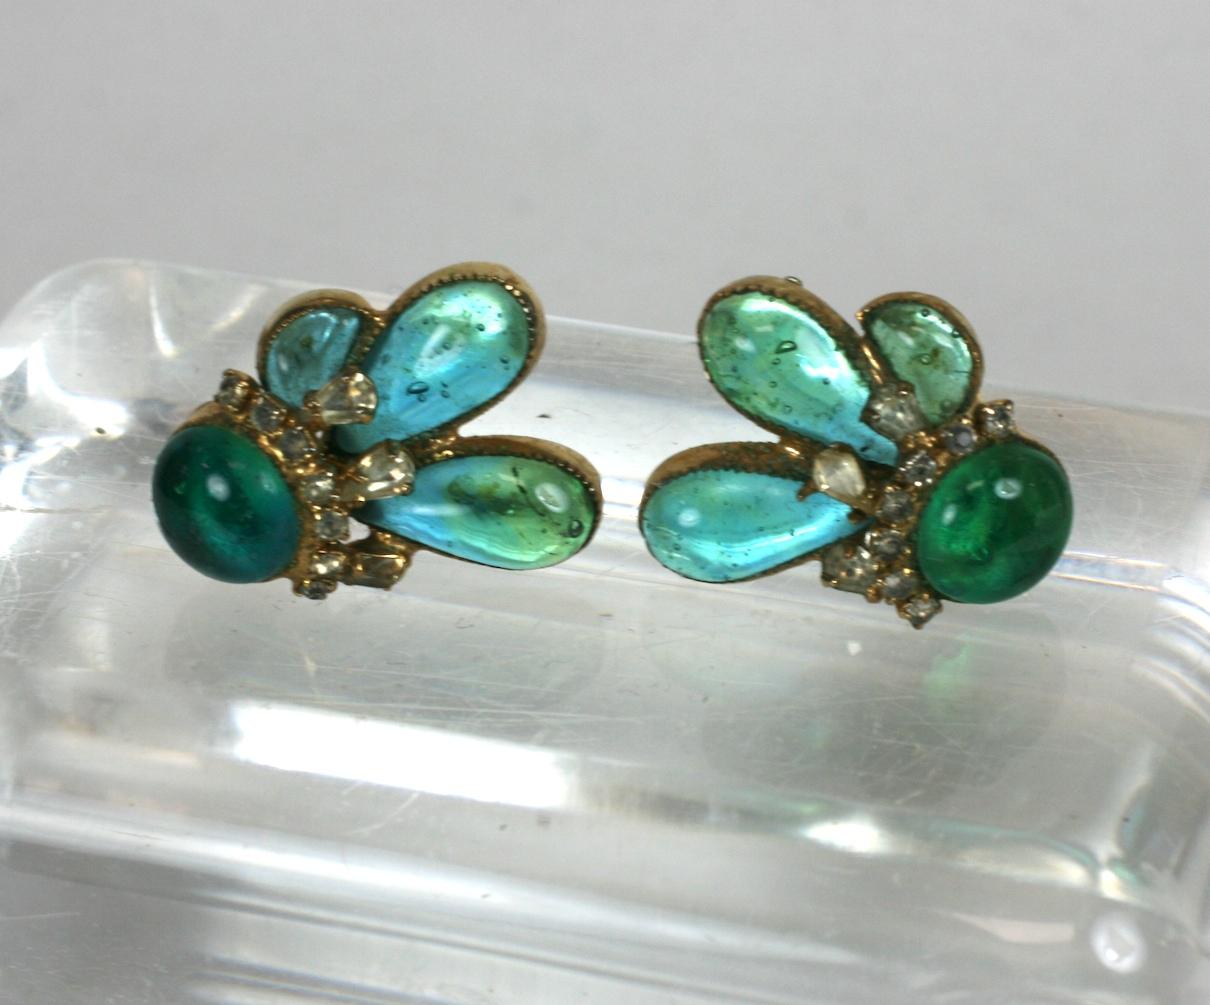 Maison Gripoix for Hattie Carnegie ombre aqua and emerald poured glass enamel petal earclips, set in gilt metal with crystal rhinestone accents. Clip back fittings.
 Excellent Condition, Signed.
Length 1 1/8